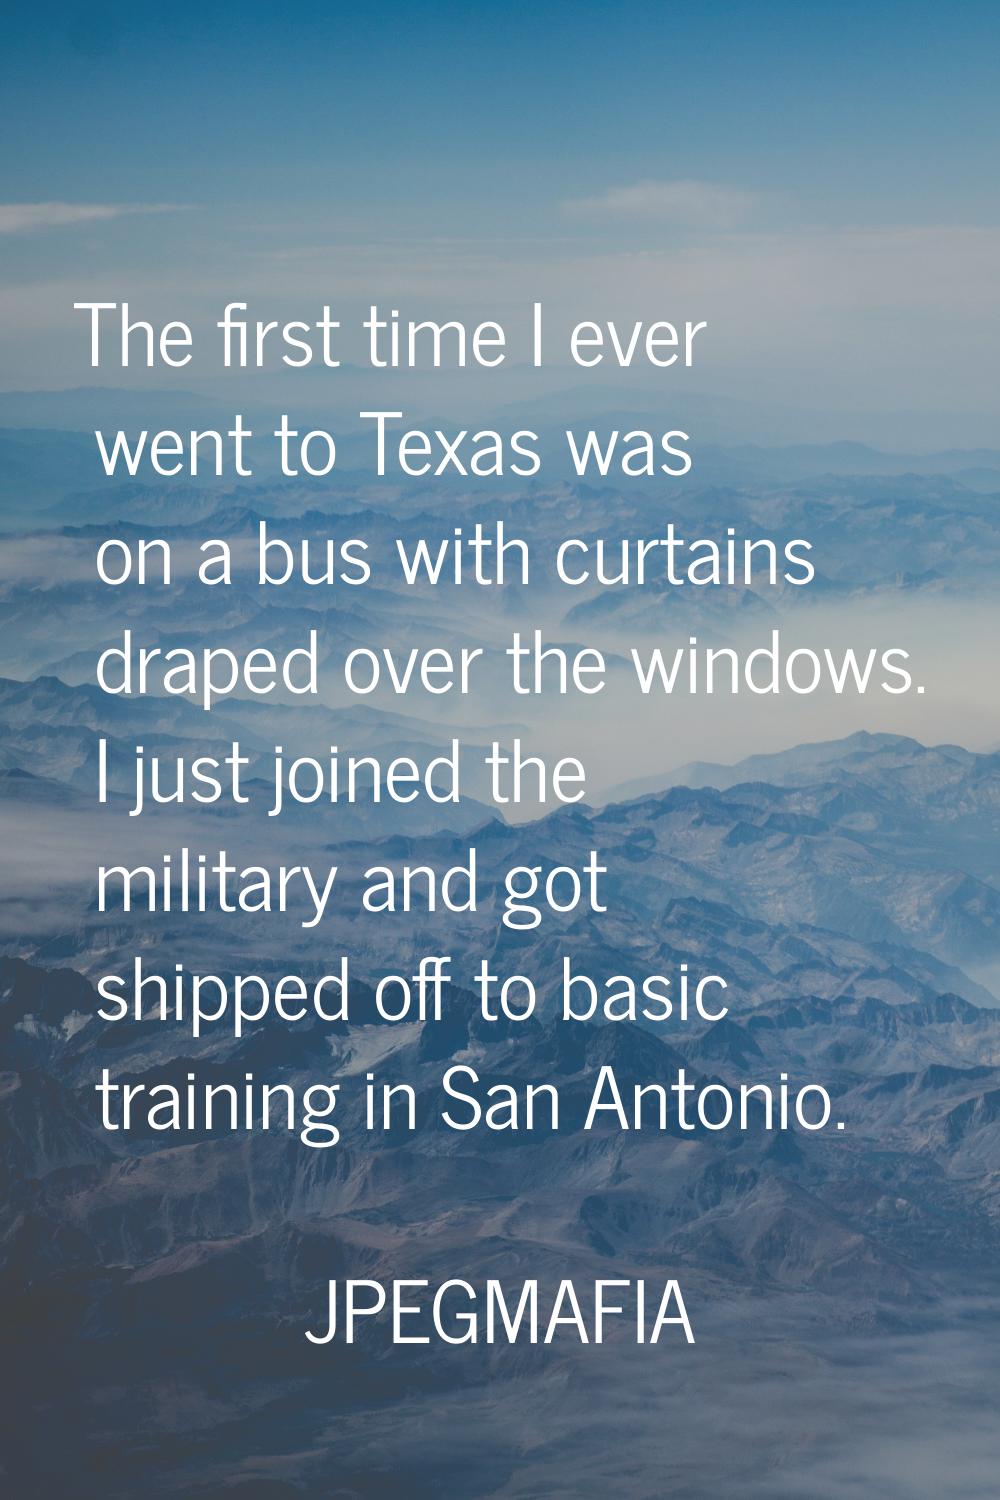 The first time I ever went to Texas was on a bus with curtains draped over the windows. I just join